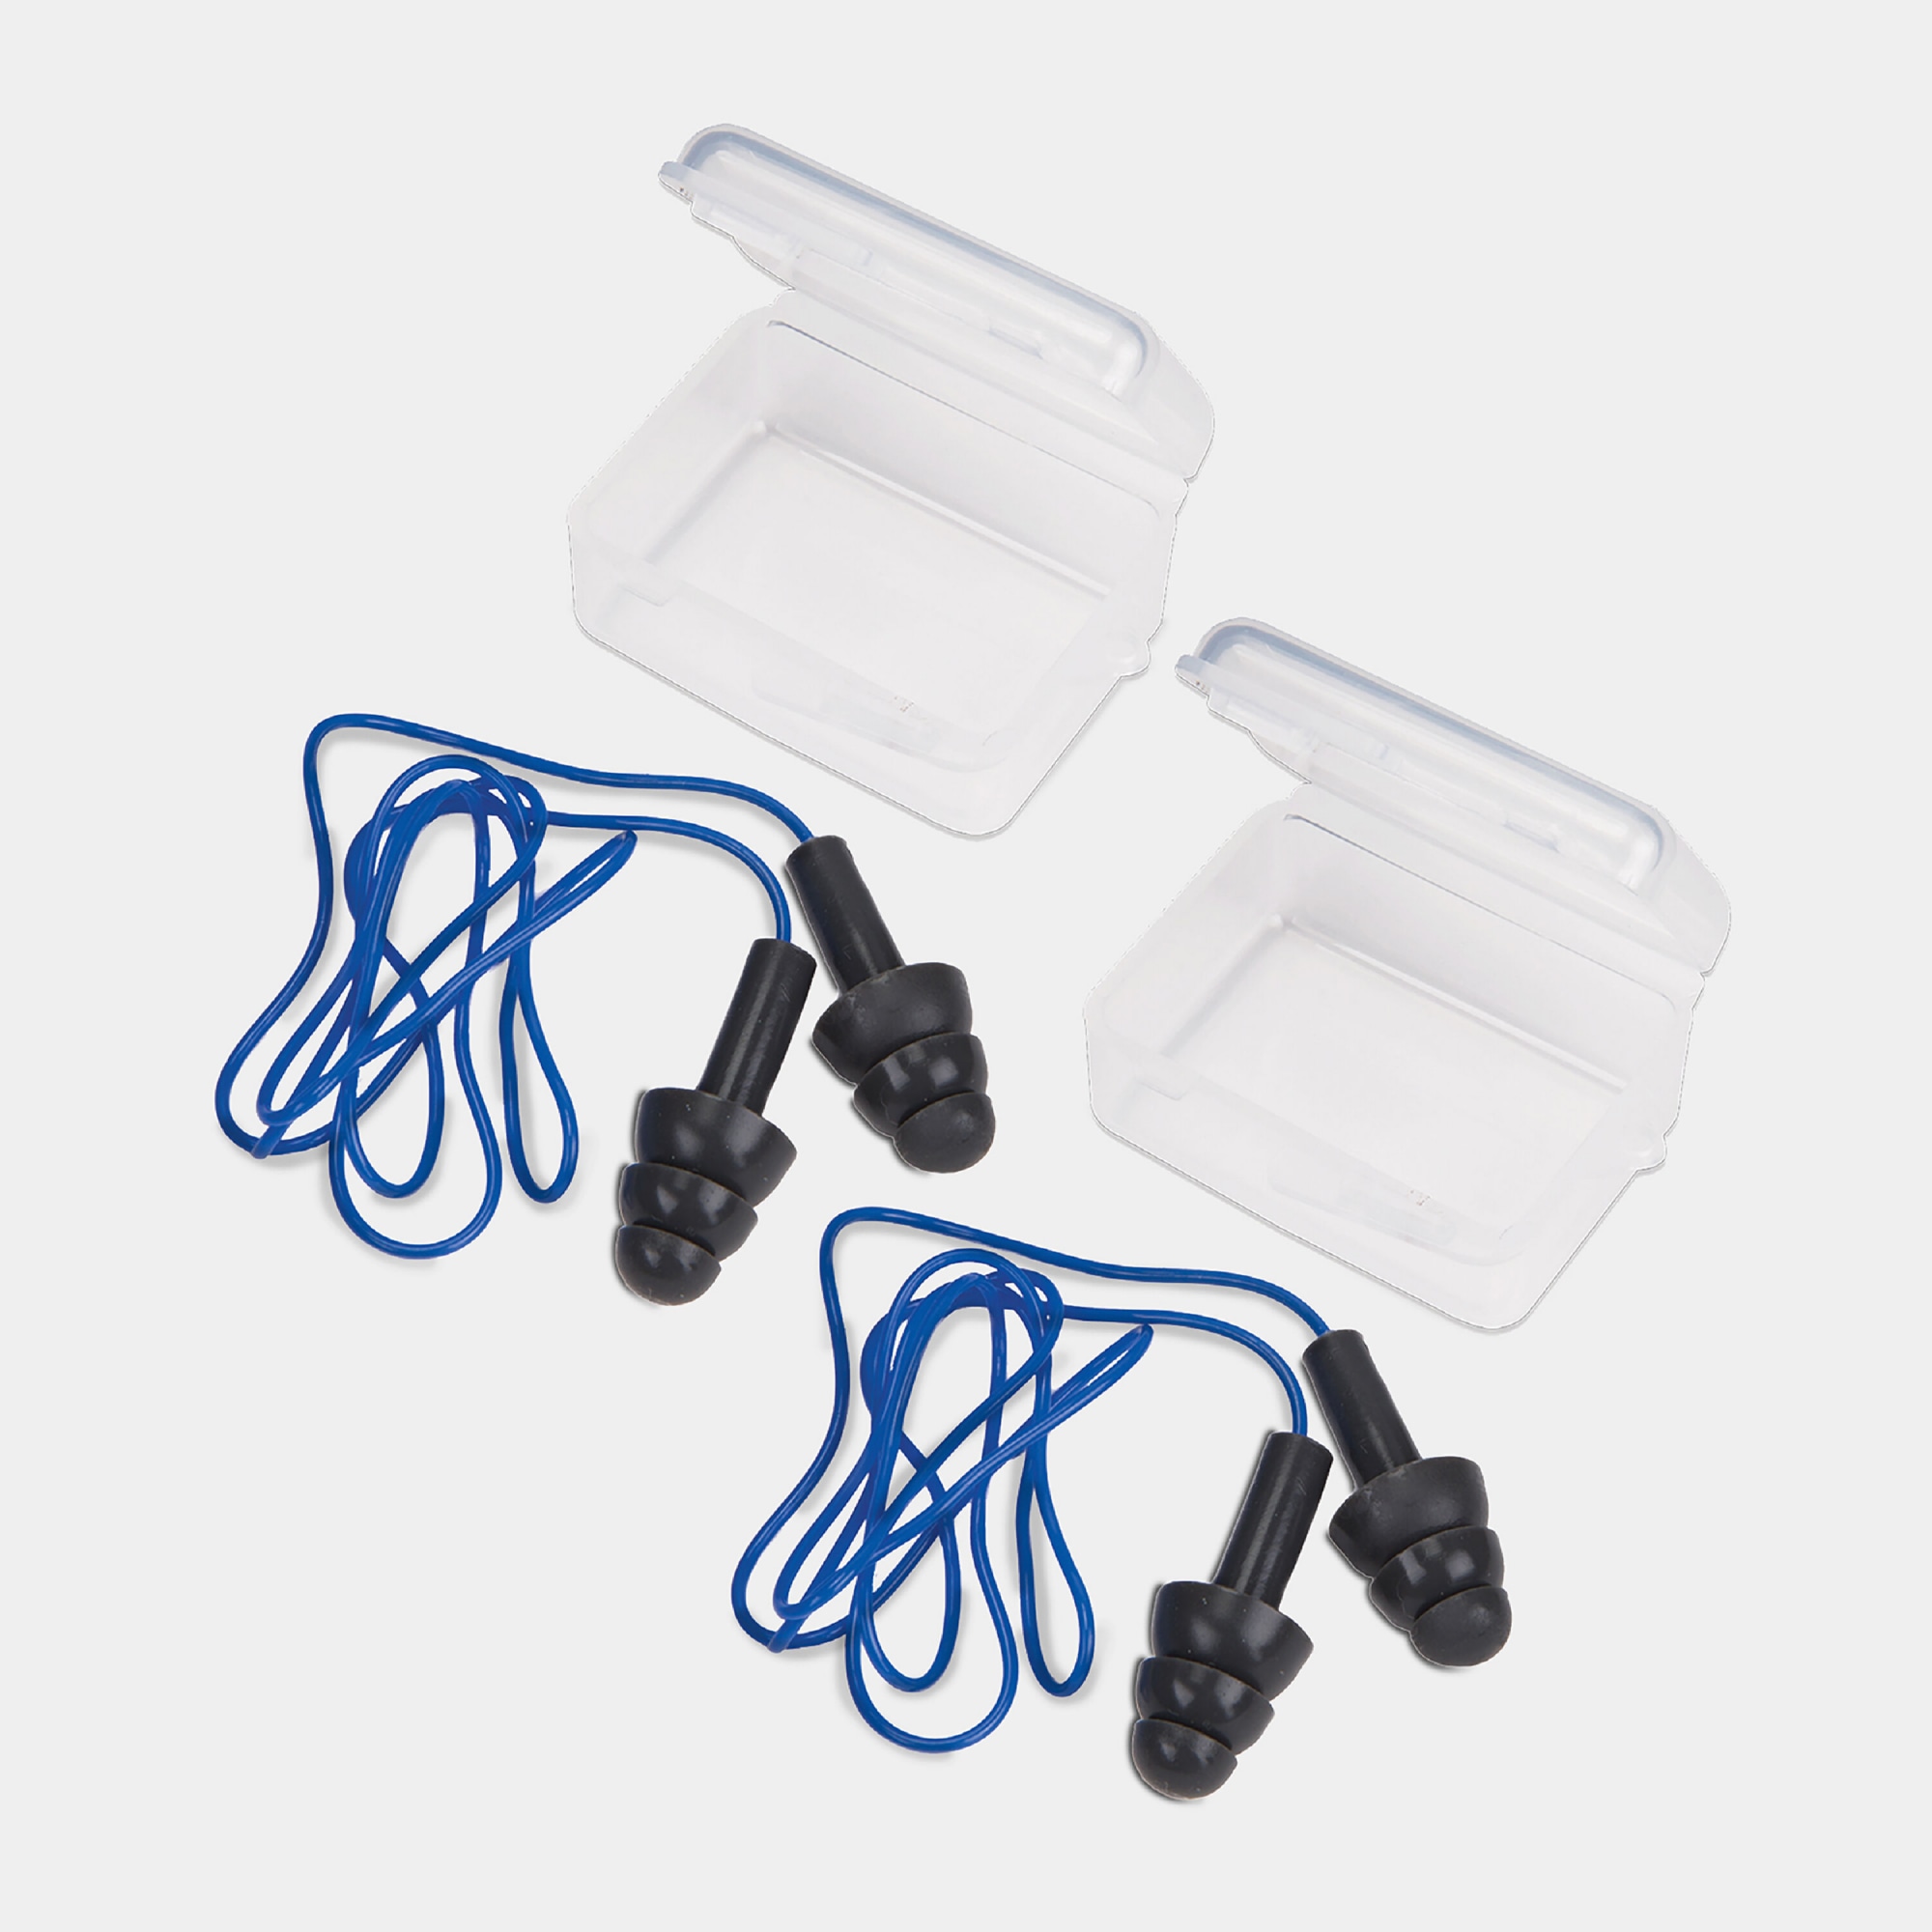 2 Pairs of Earplugs With Cords